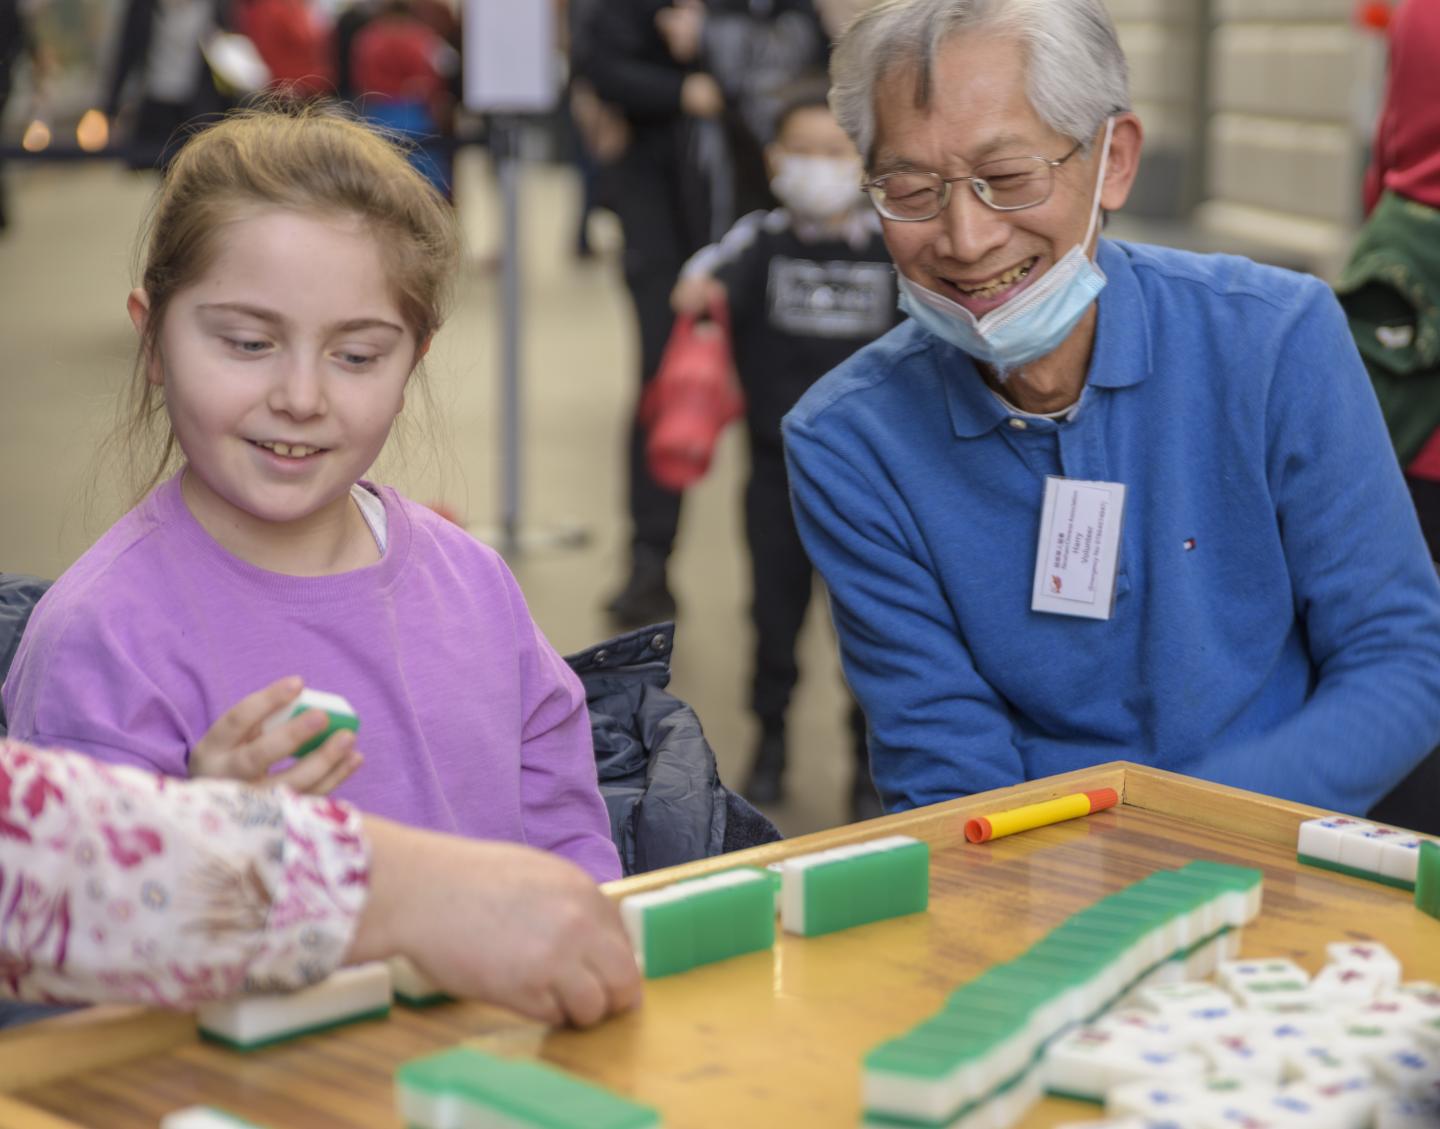 A child learns to play mahjong at the National Maritime Museum during Lunar New Year 